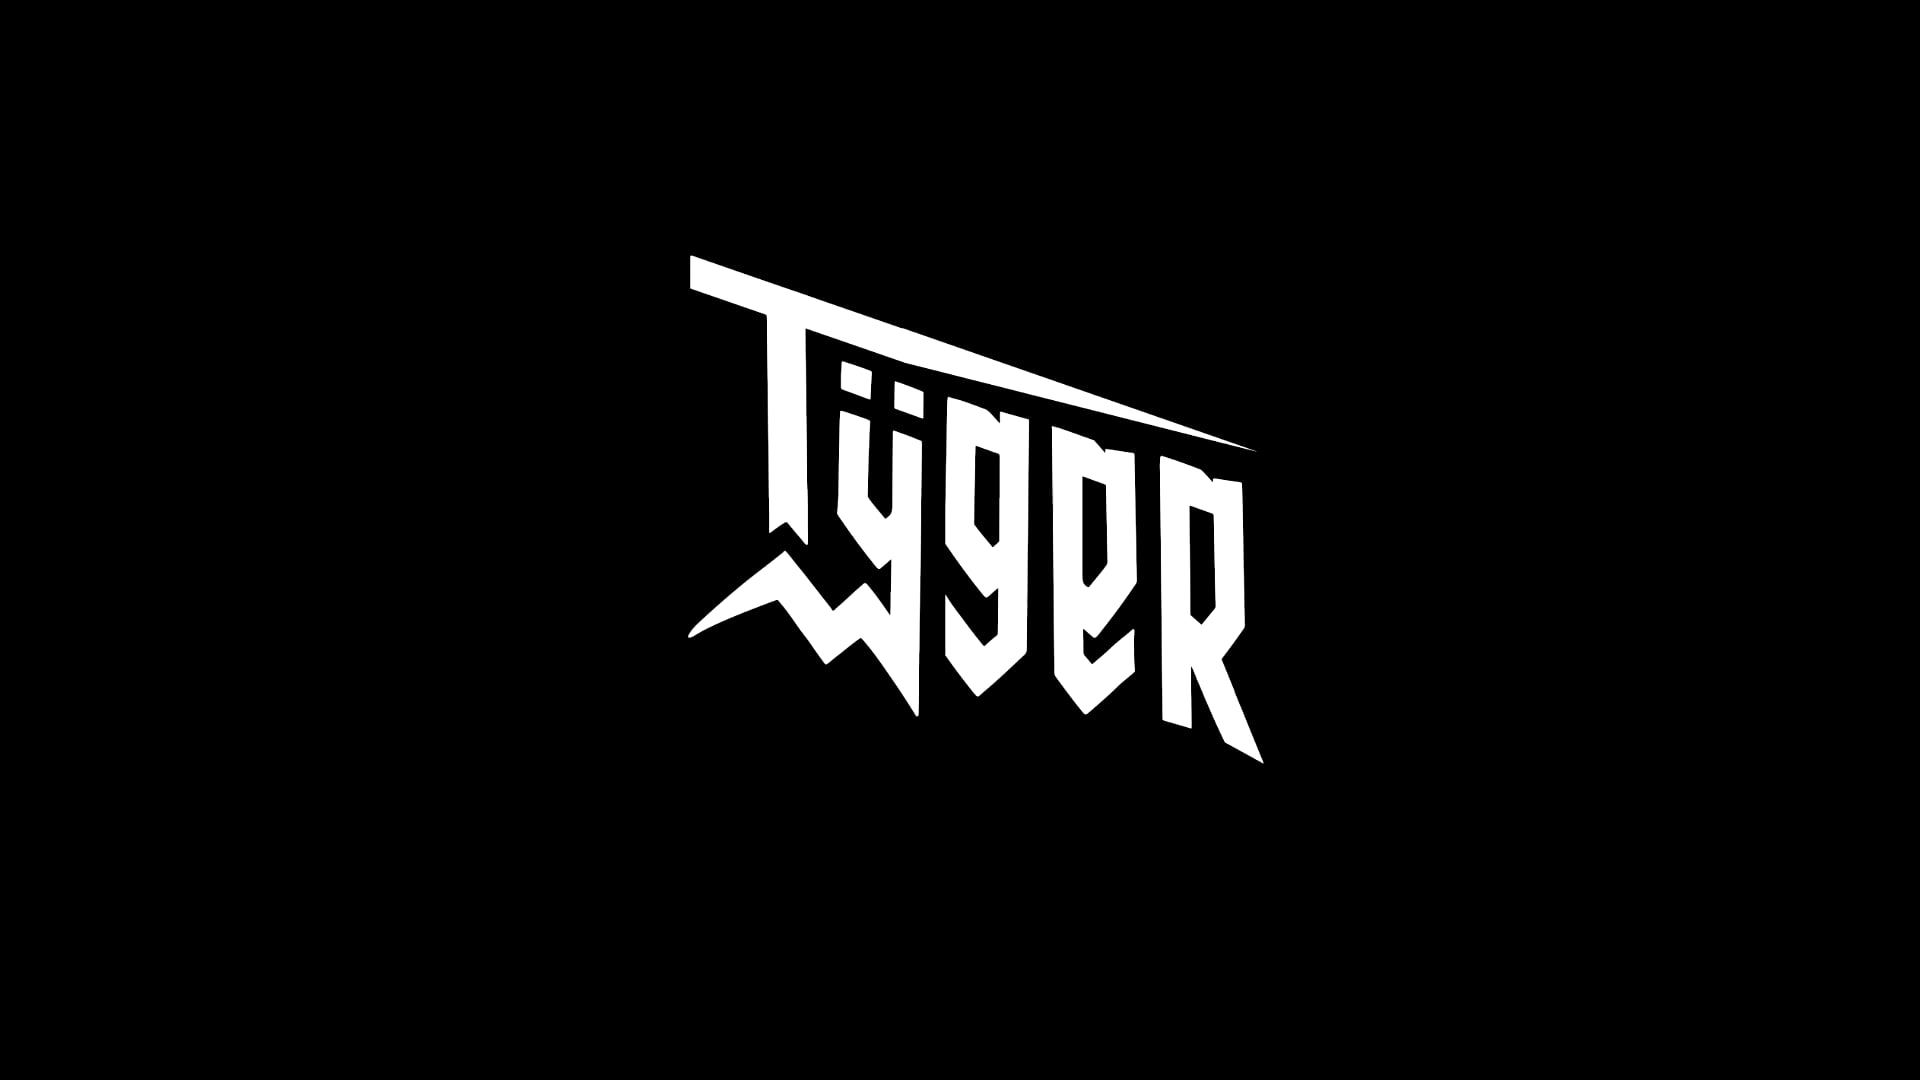 TŸGER "Revival Of The Wicked"